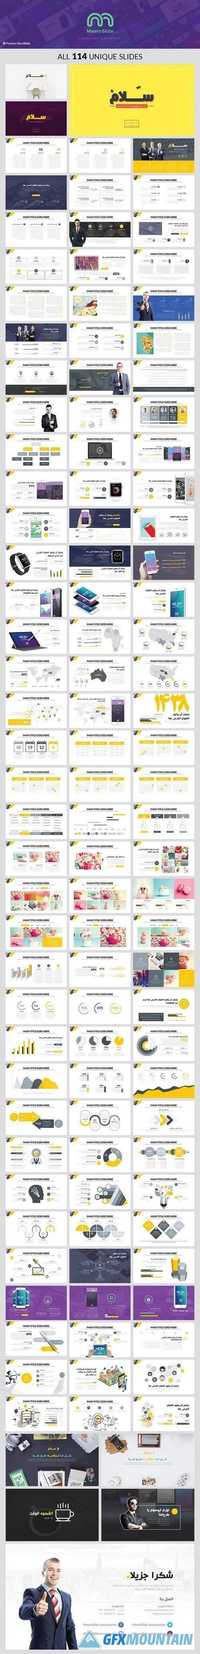 Salam - RTL Powerpoint Template 1572218